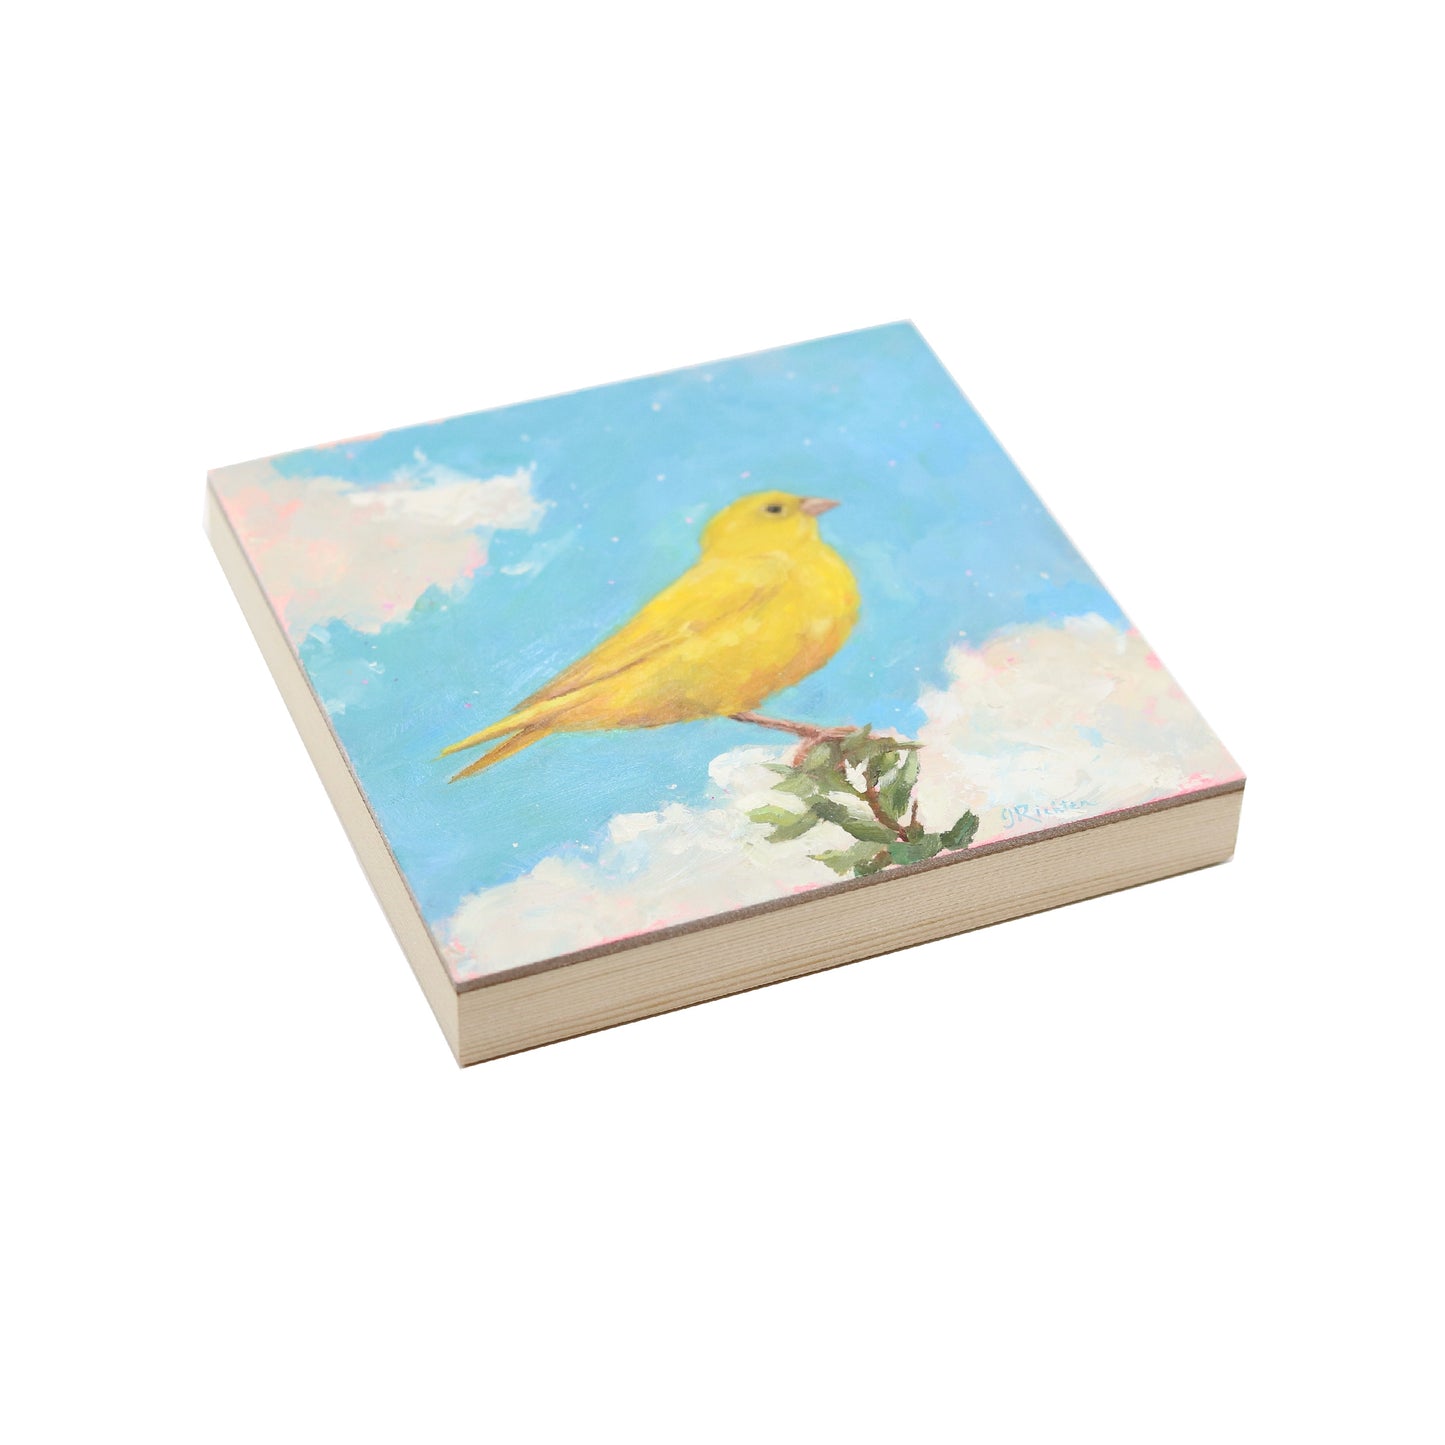 Yellow Canary in Clouds| Original Oil Painting | 6"x 6"